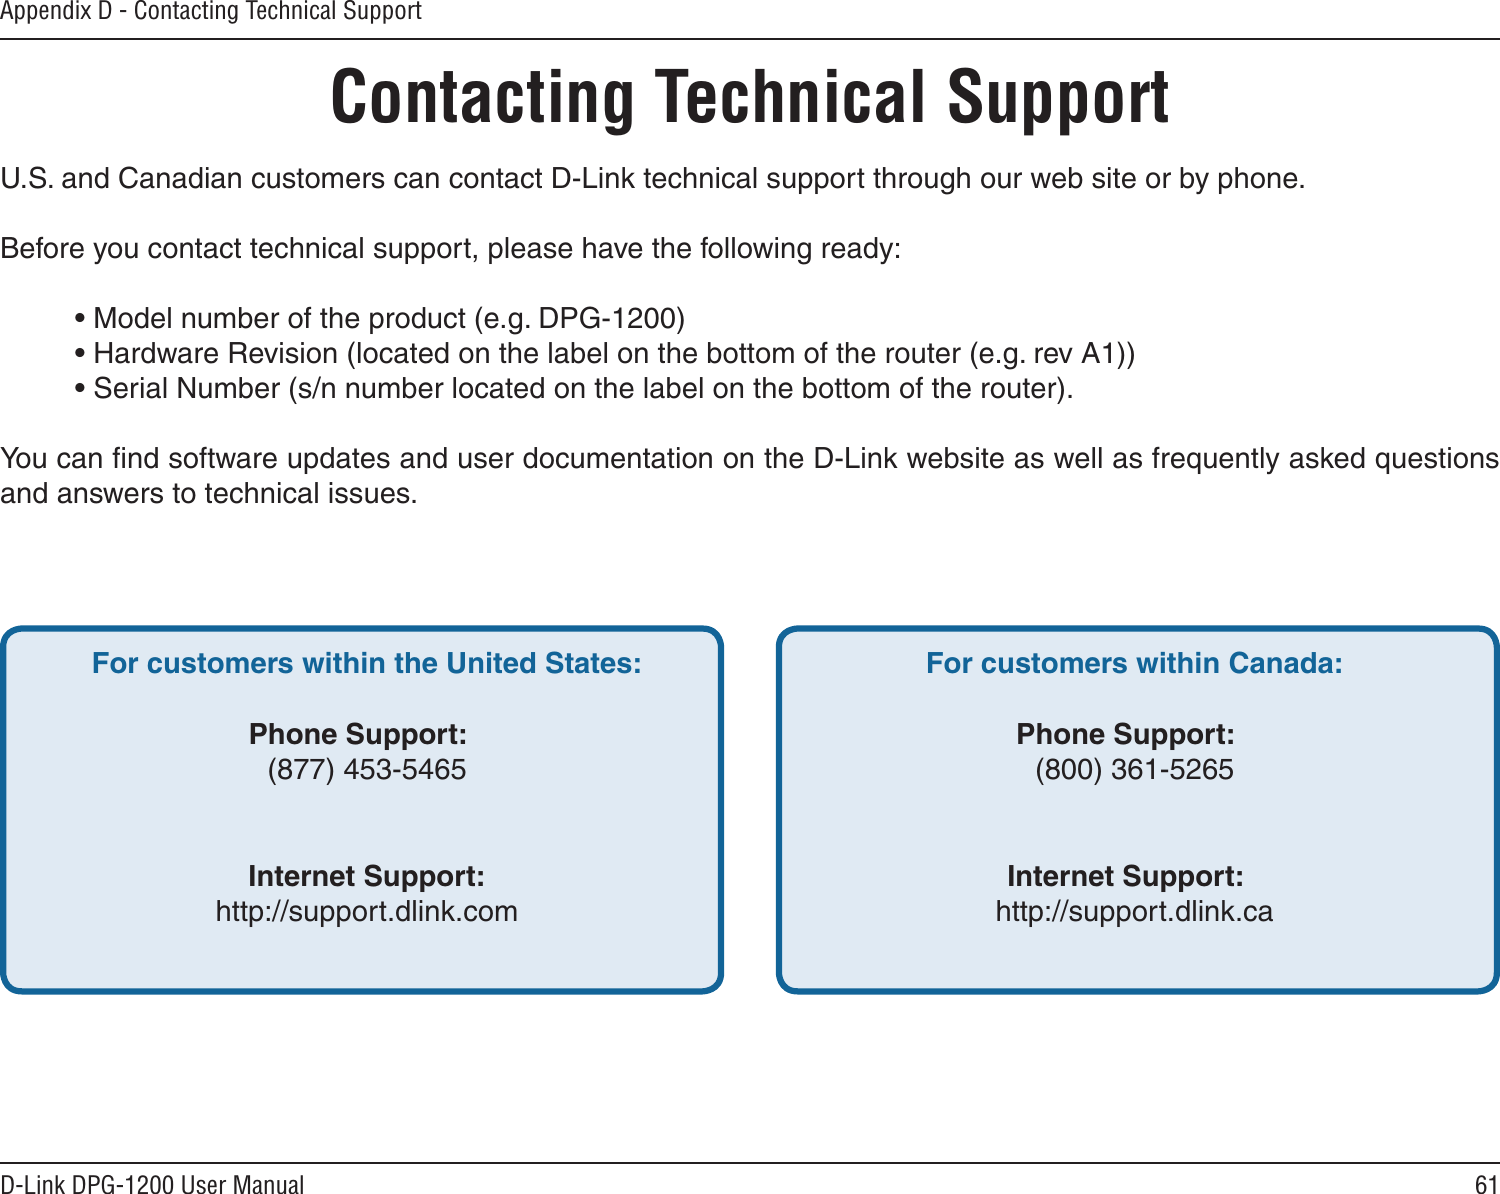 61D-Link DPG-1200 User ManualAppendix D - Contacting Technical SupportContacting Technical SupportU.S. and Canadian customers can contact D-Link technical support through our web site or by phone.Before you contact technical support, please have the following ready:  • Model number of the product (e.g. DPG-1200)  • Hardware Revision (located on the label on the bottom of the router (e.g. rev A1))  • Serial Number (s/n number located on the label on the bottom of the router). You can ﬁnd software updates and user documentation on the D-Link website as well as frequently asked questions and answers to technical issues.For customers within the United States: Phone Support:  (877) 453-5465  Internet Support:  http://support.dlink.com For customers within Canada: Phone Support:  (800) 361-5265    Internet Support:  http://support.dlink.ca